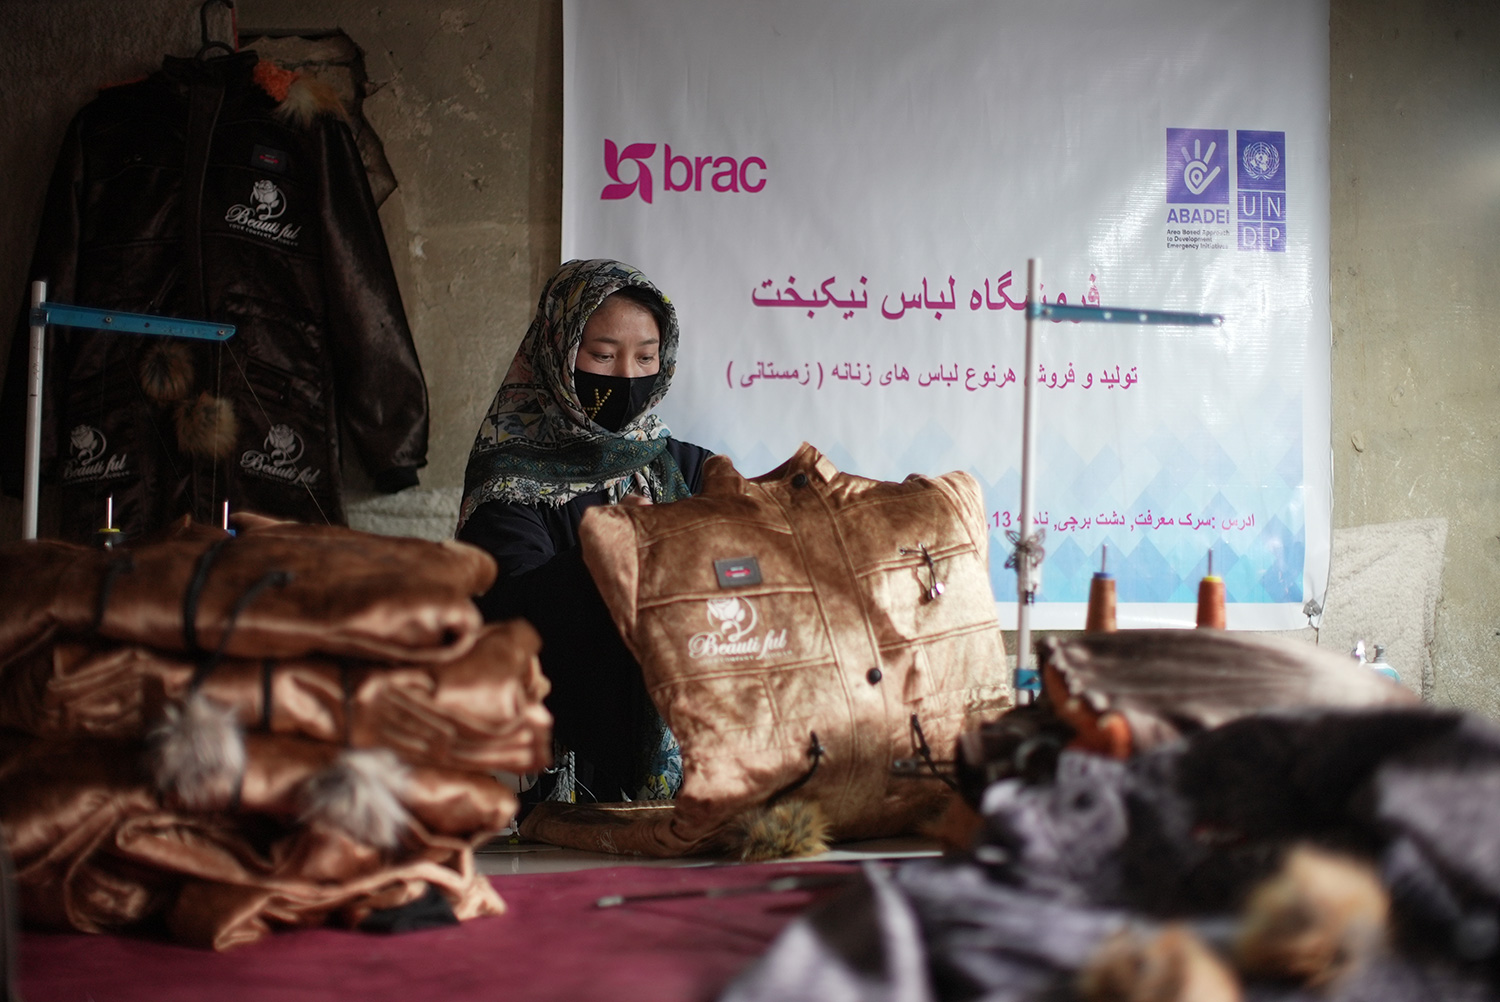 Zainab, a tailor in Afghanistan, inspects one of her coat creations.